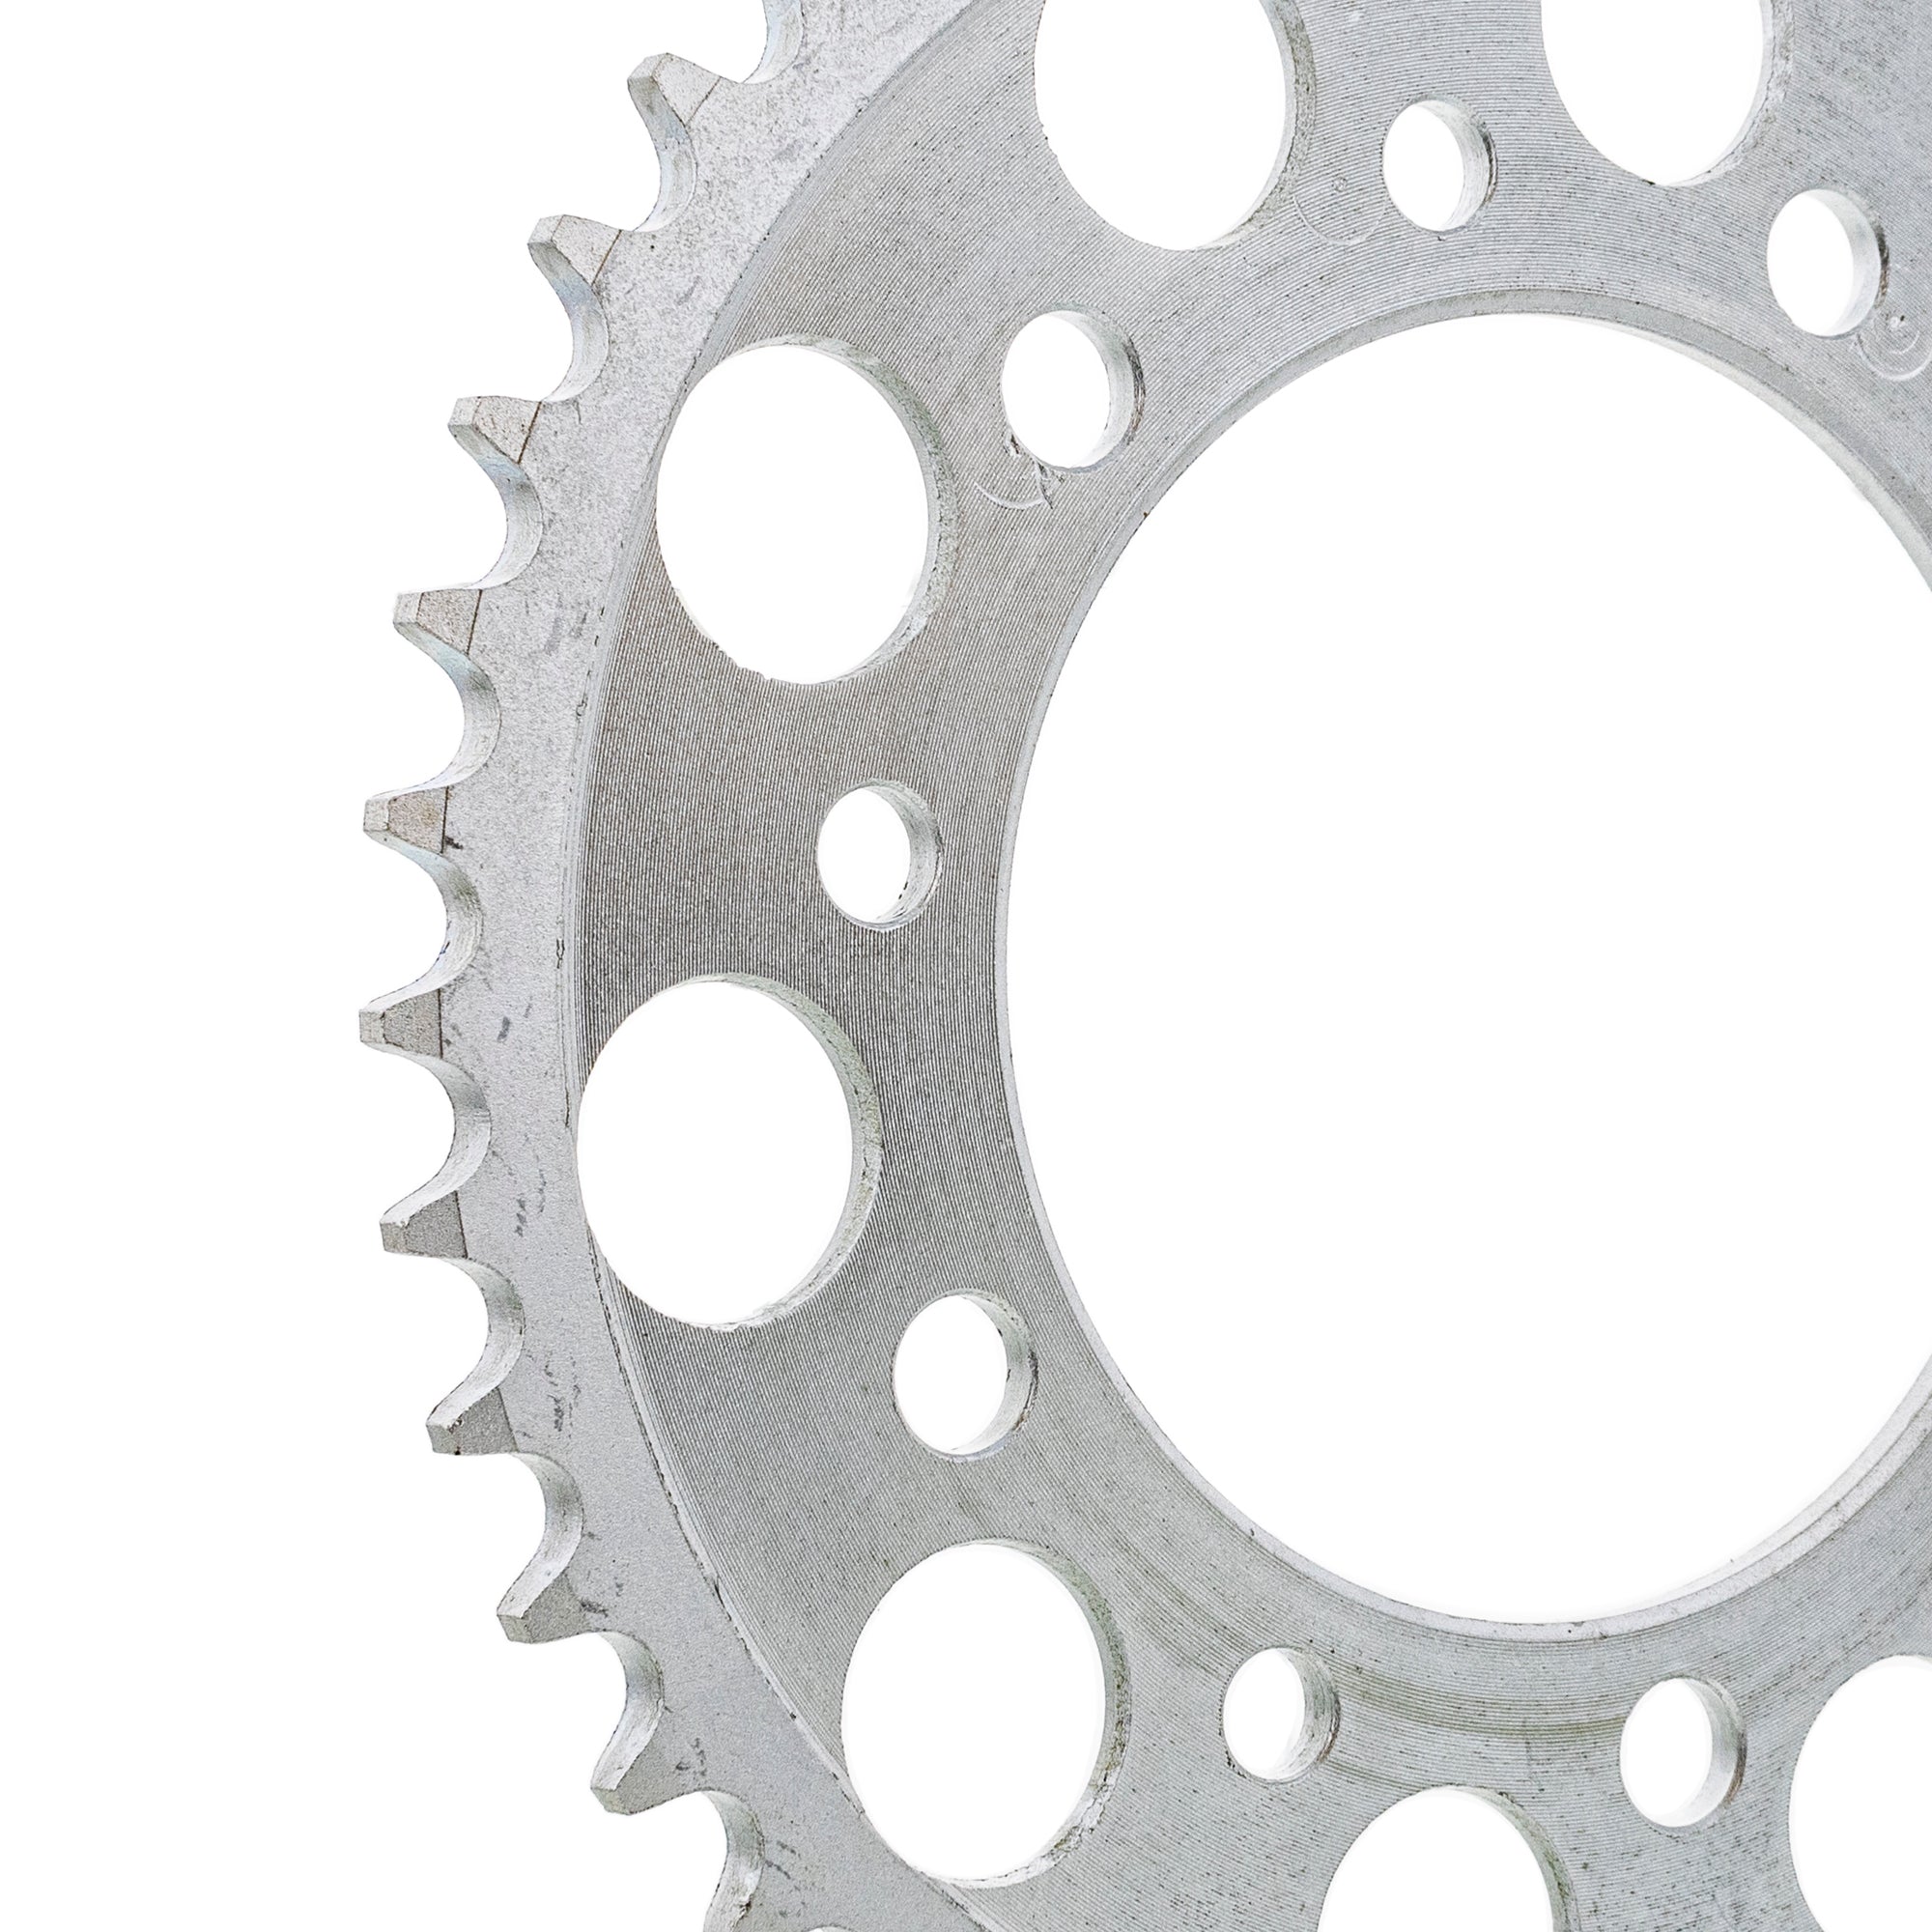 520 Pitch 44 Tooth Rear Drive Sprocket for Honda CBR600F4 Chain